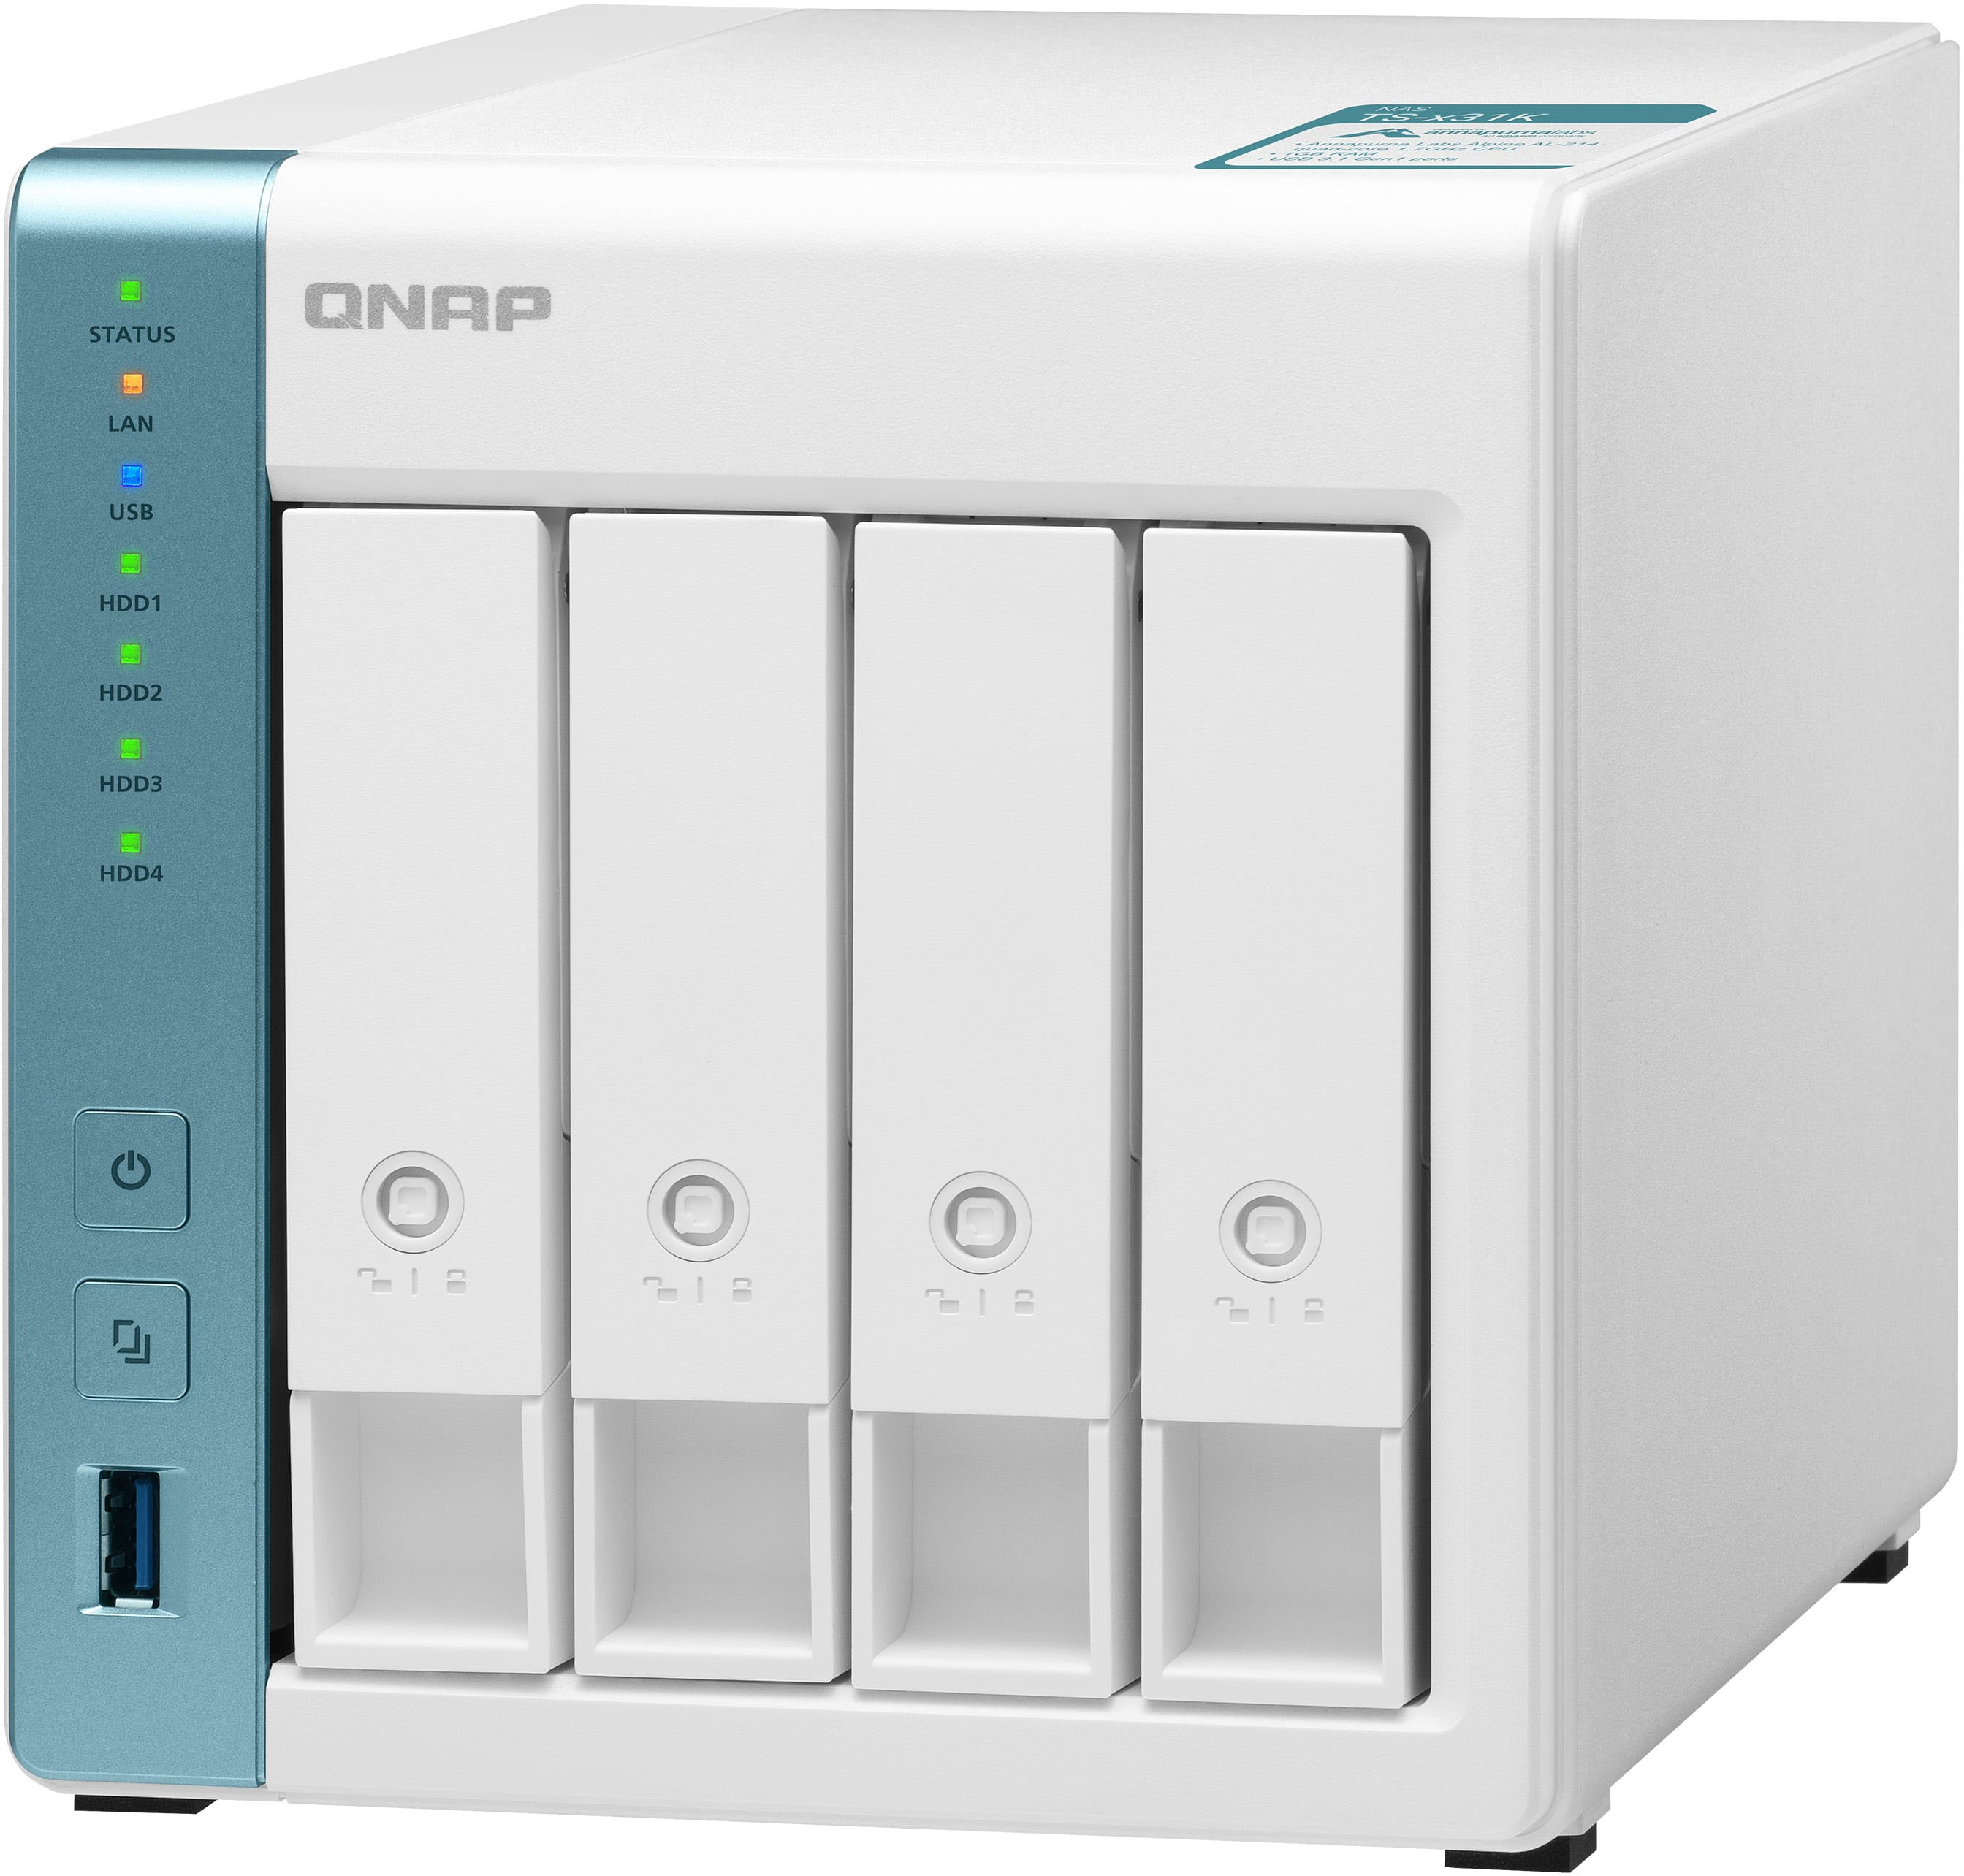 Angle View: QNAP - TS-431K 4-Bay, Personal Cloud for Backup and Data Sharing, 1GB RAM, External Network Attached Storage (NAS) - White